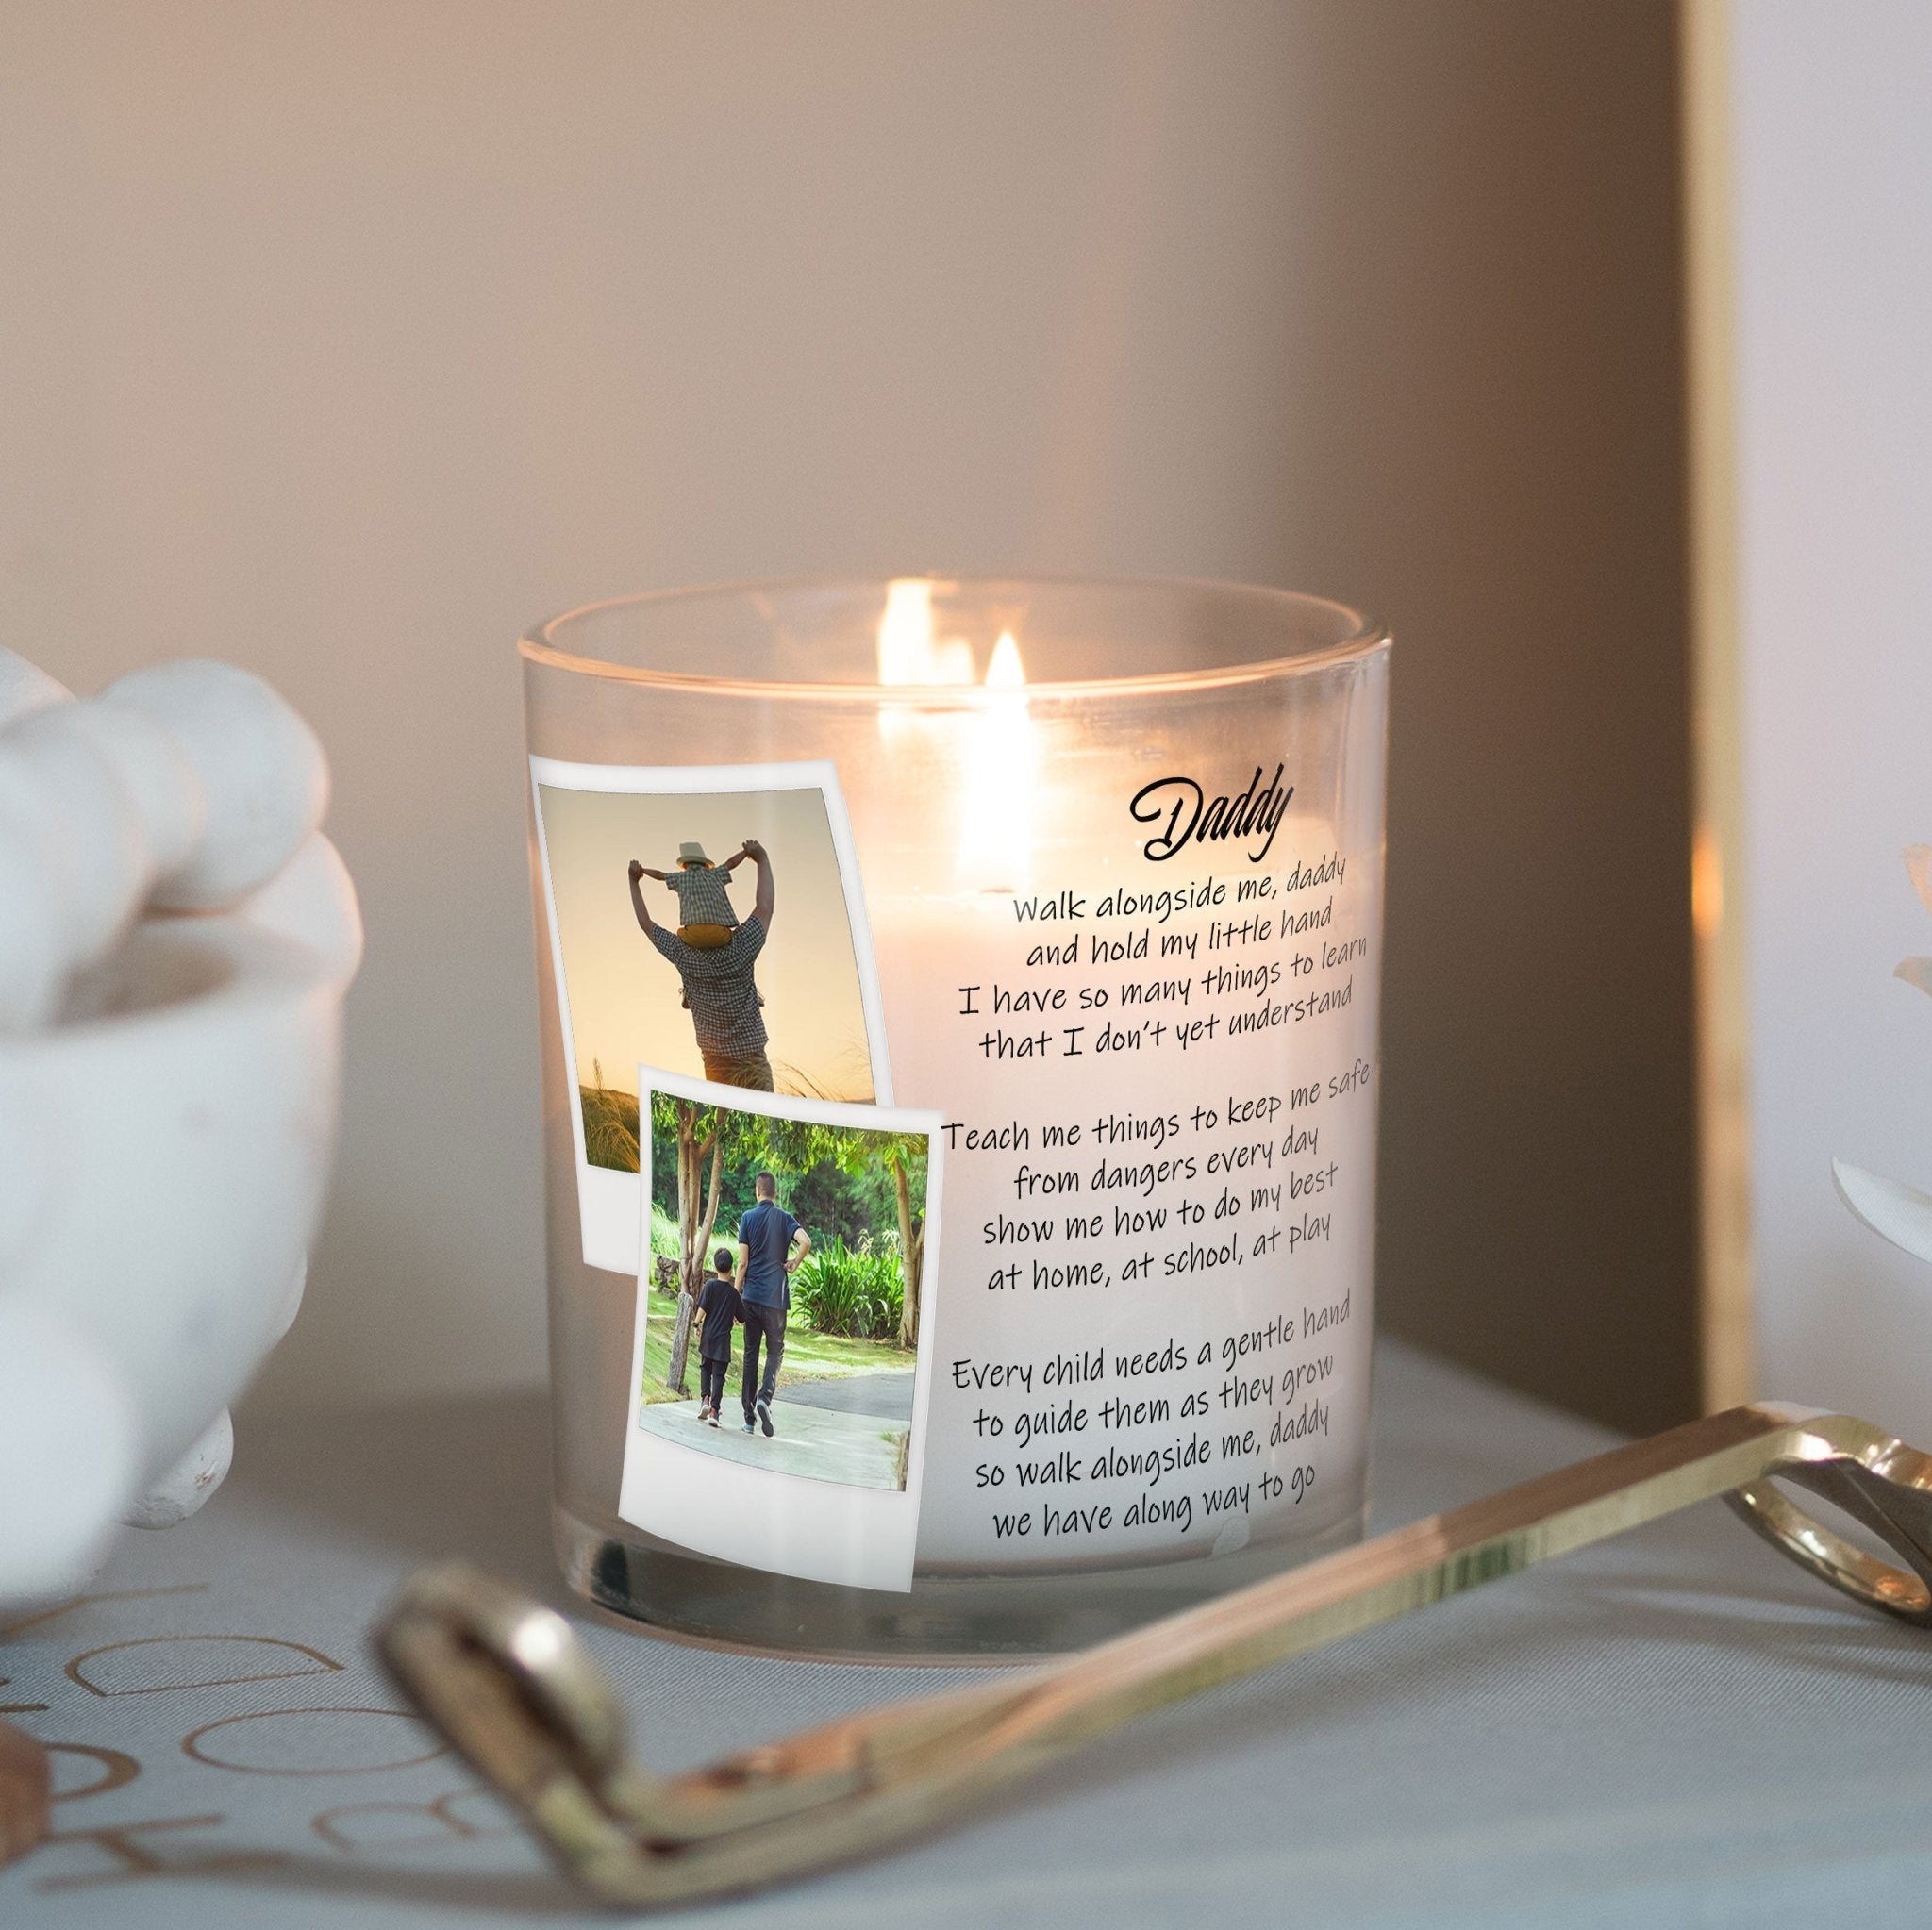 New Dad Quotes Custom Photo Candle Holder | First Father's Day Gift Ideas From Wife | Personalized Votive Glass with Picture Home Decor Candleholder - Unique Prints